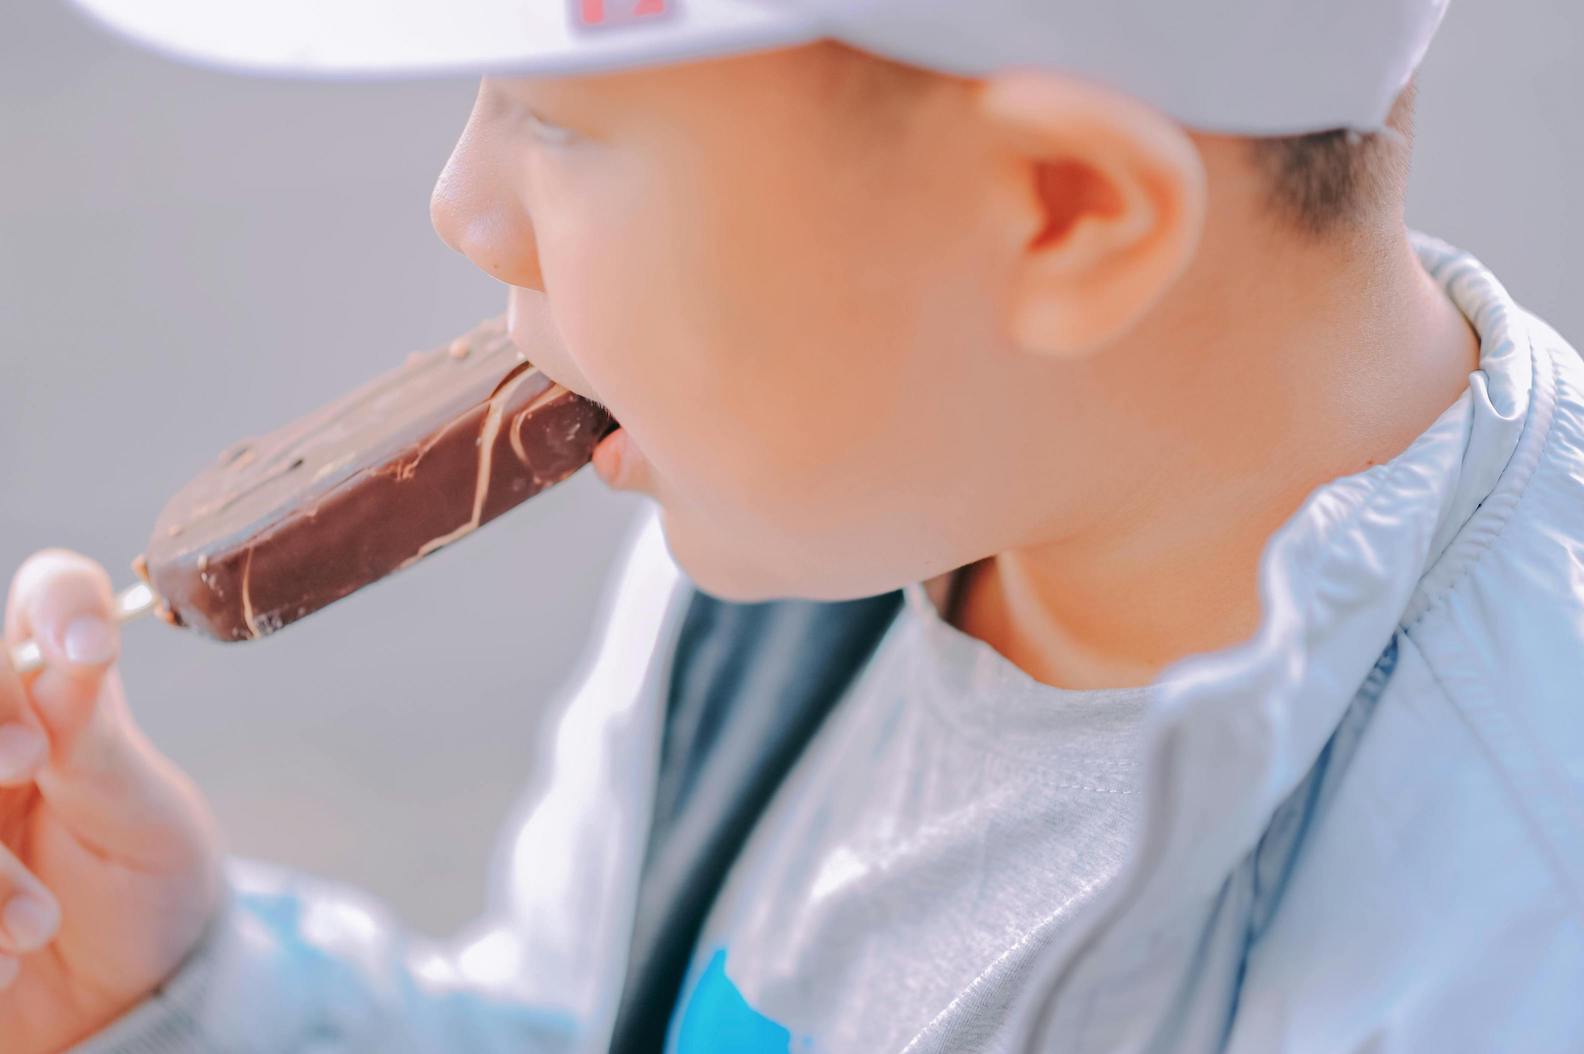 How Targeted Marketing Has Increased Obesity Rates in Children